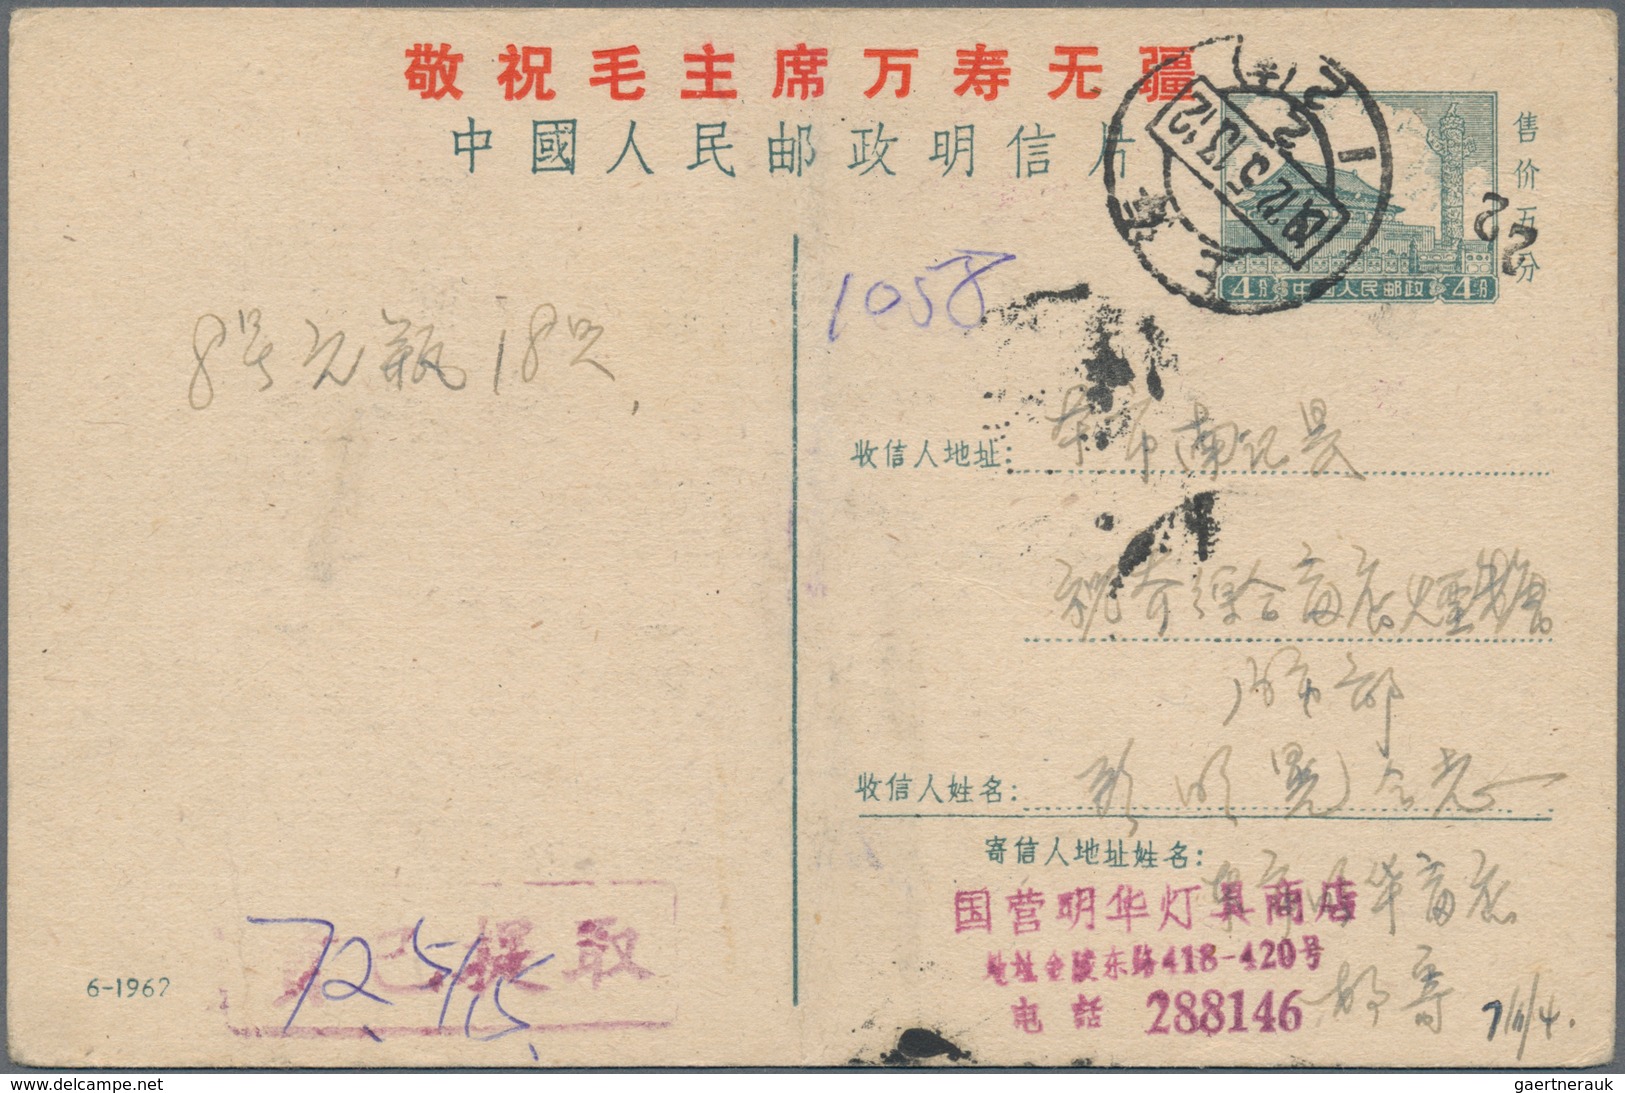 China - Volksrepublik - Ganzsachen: 1952/81, collection of used only inland stationery cards (31) of